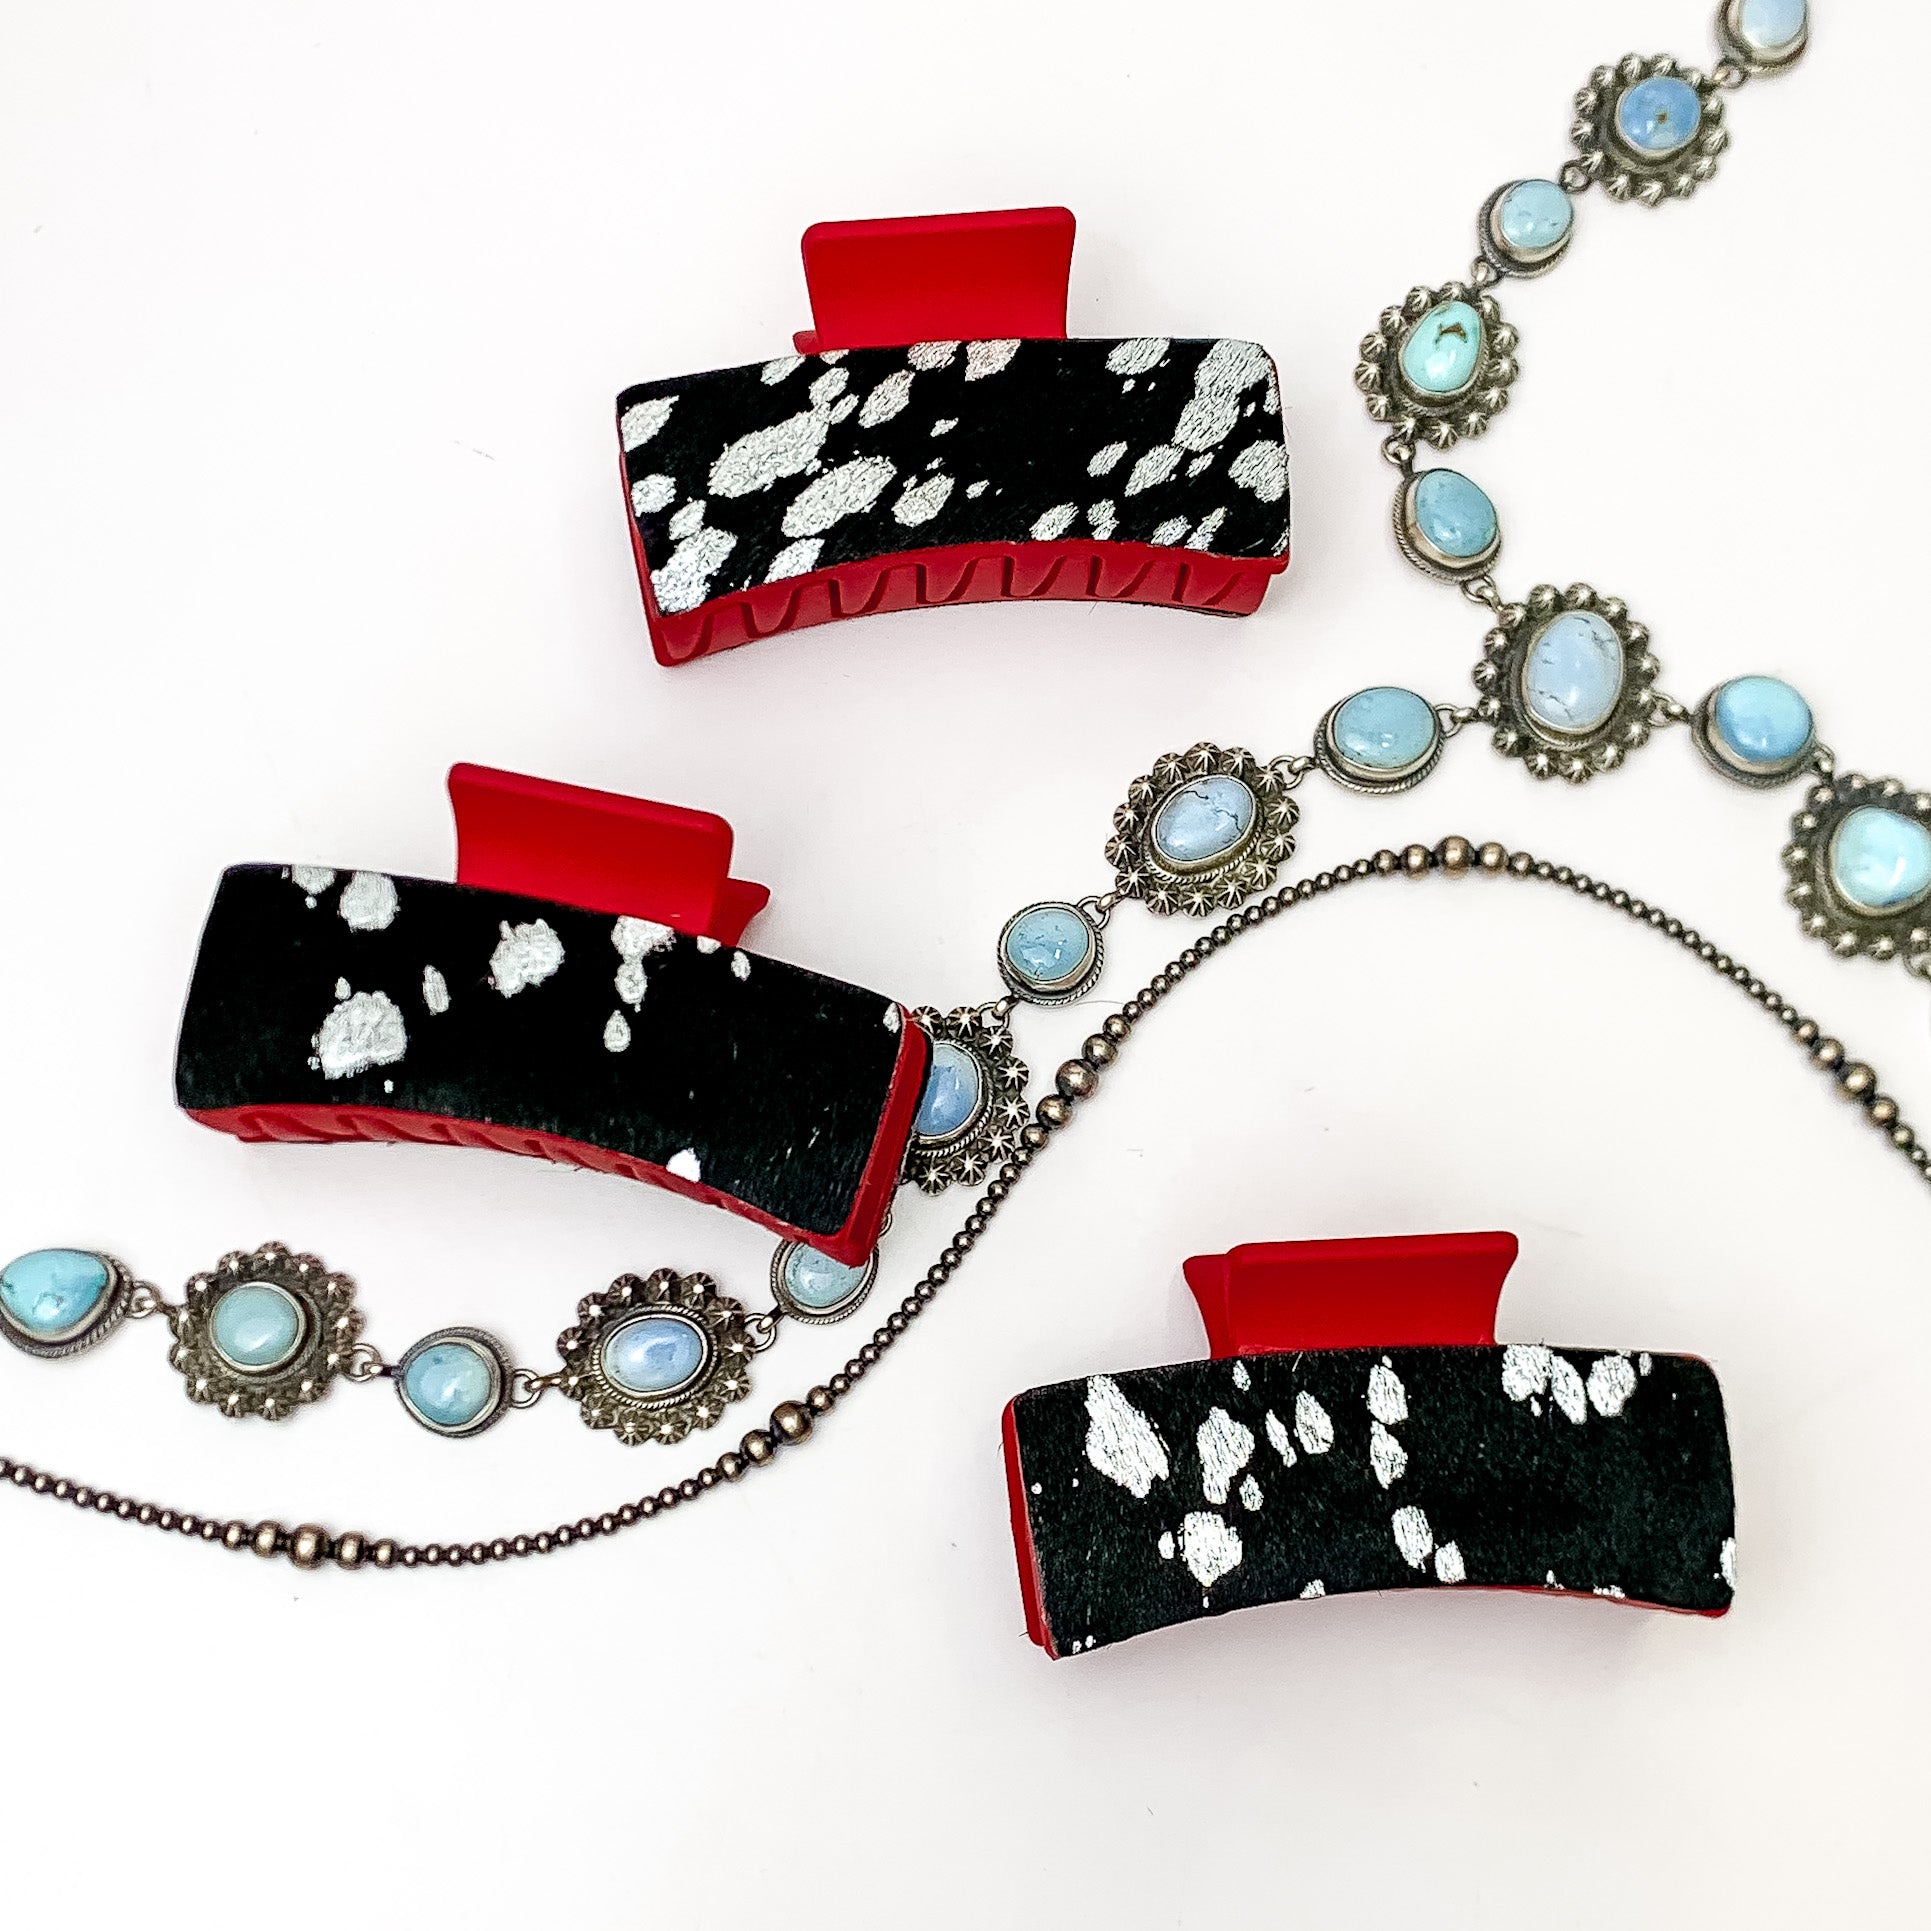 Pictured are three red hair clips with black and silver hide patches. These earrings are pictured on a white background with silver necklaces under the clips. 